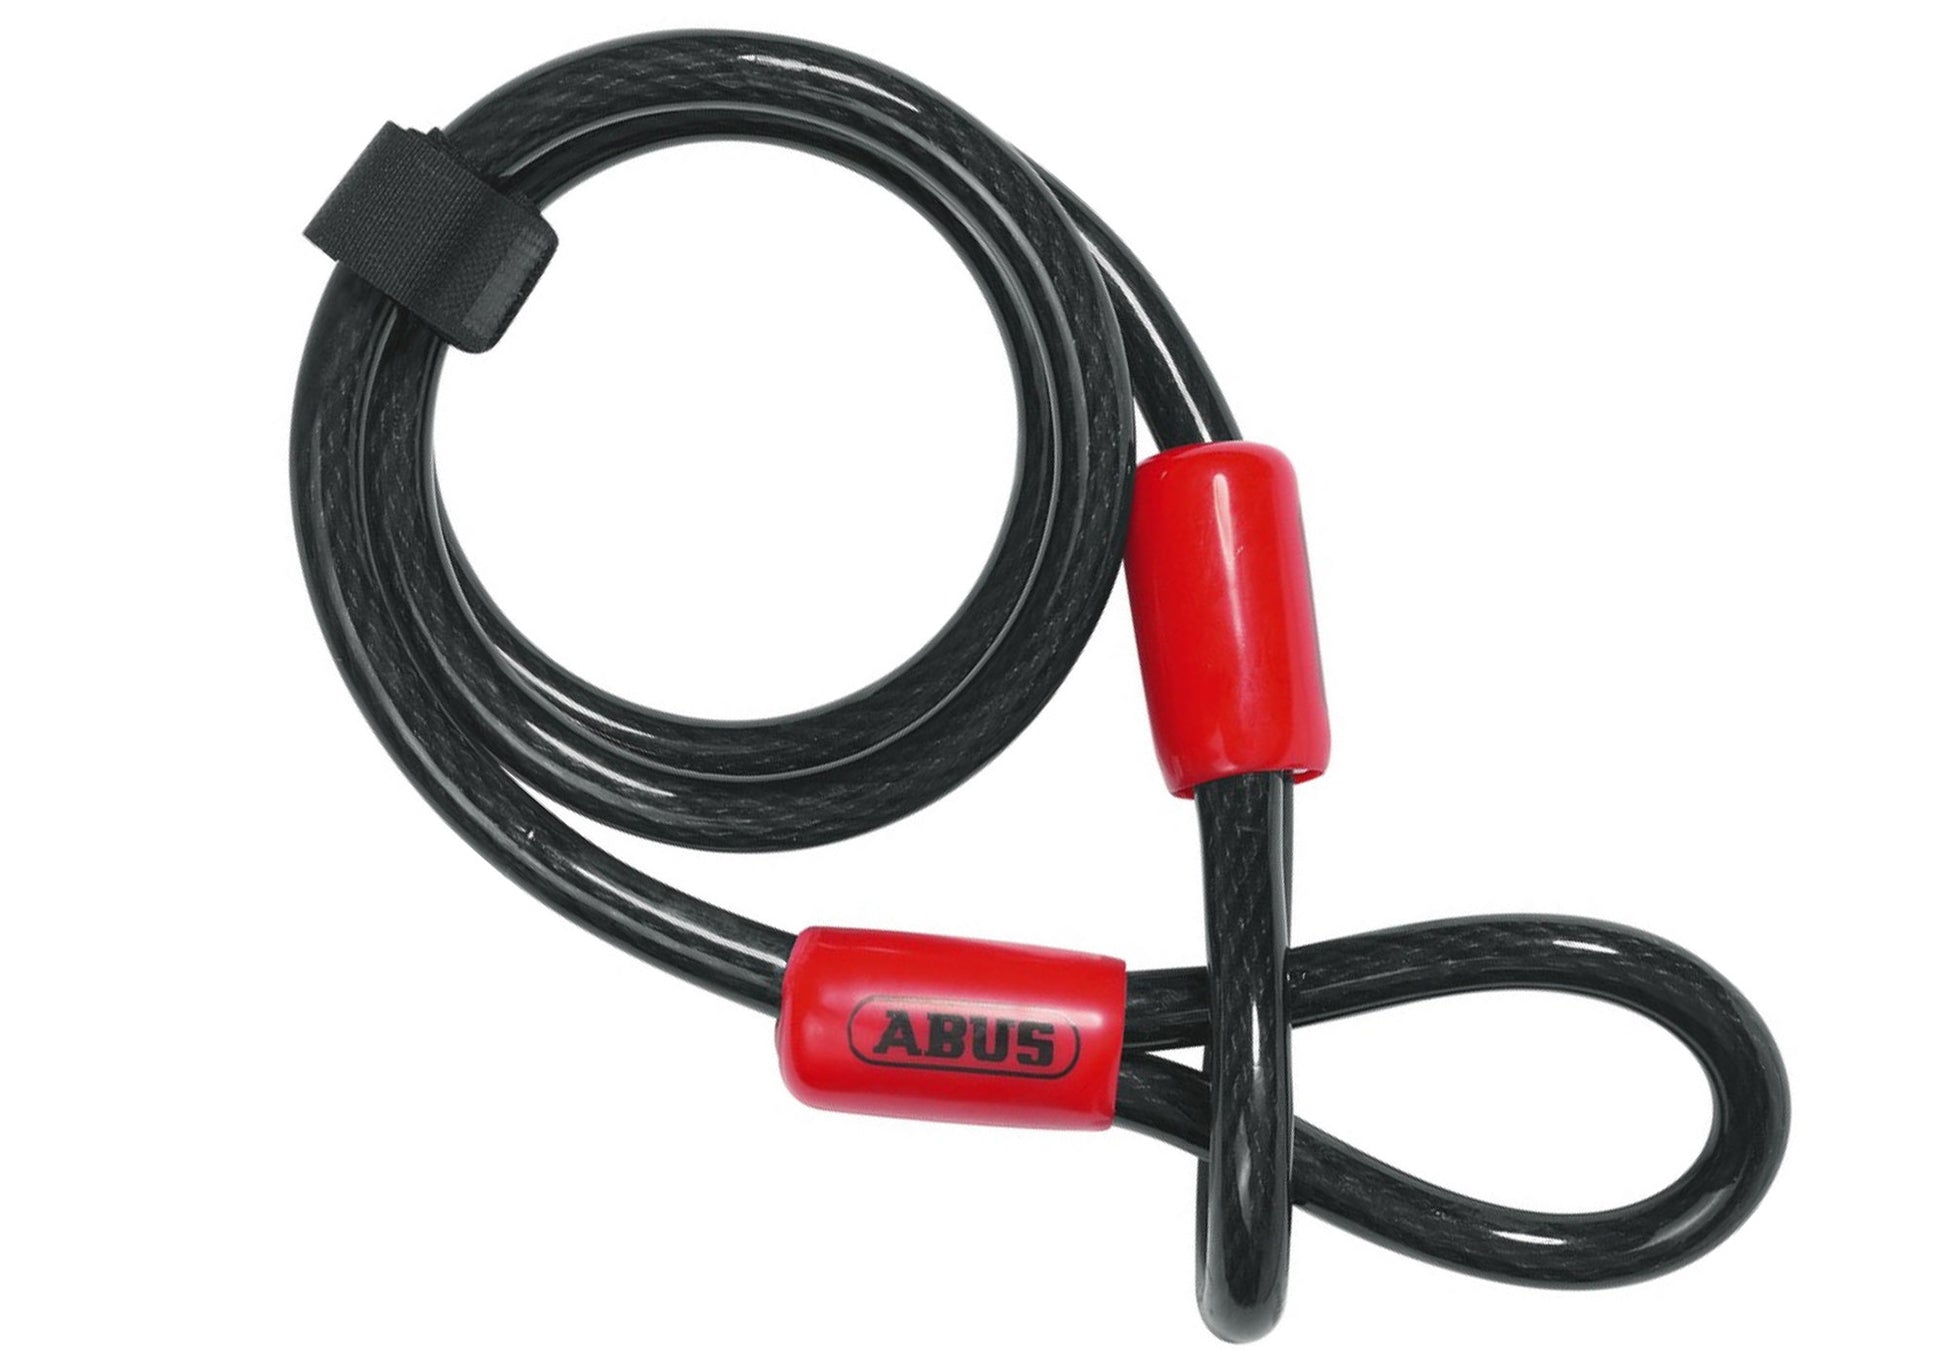 Abus Cobra Cable 220cm Woolys Wheels Cable